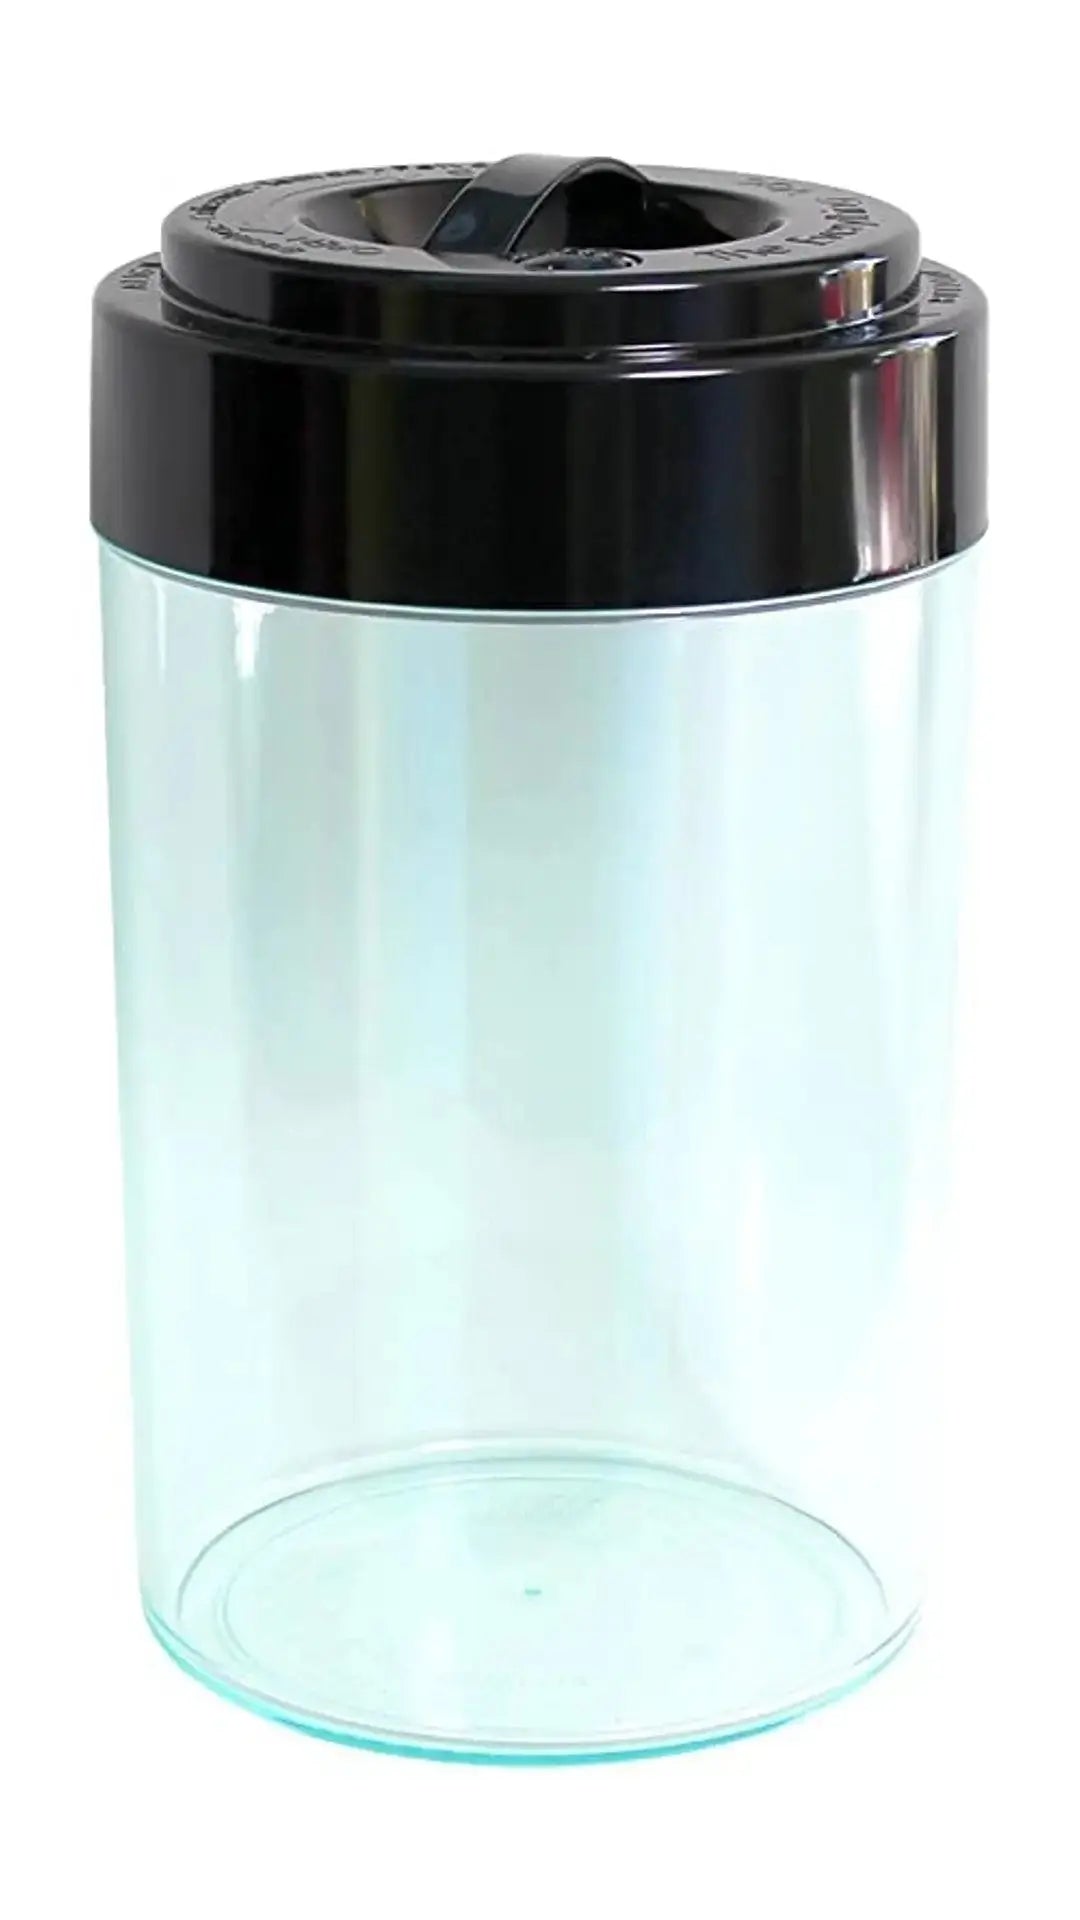 Breadvac 10 liter / 2500g / Clear / Black - TightVac Europe - The eassiest storage solutions